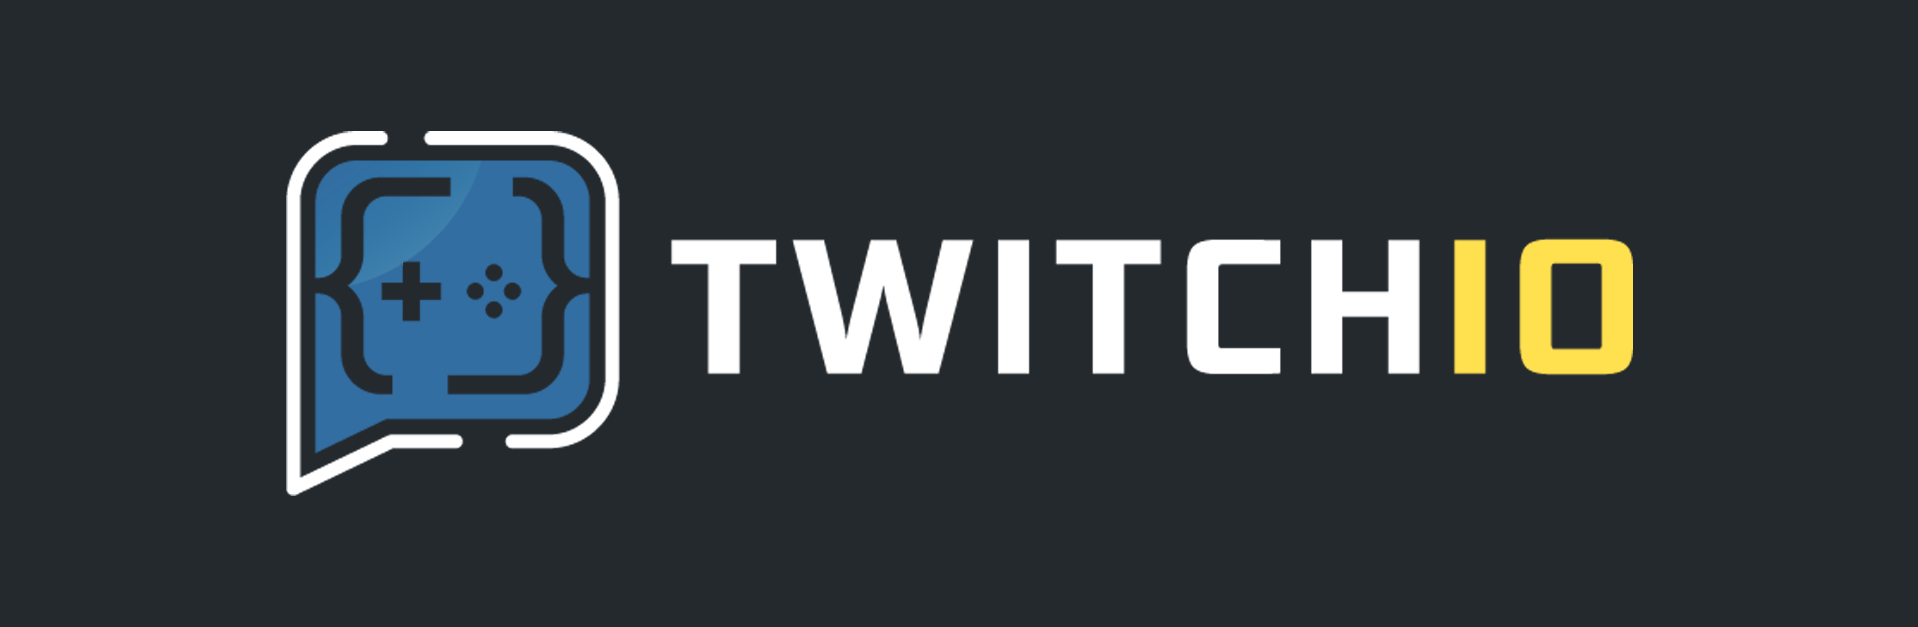 https://raw.githubusercontent.com/TwitchIO/TwitchIO/master/logo.png